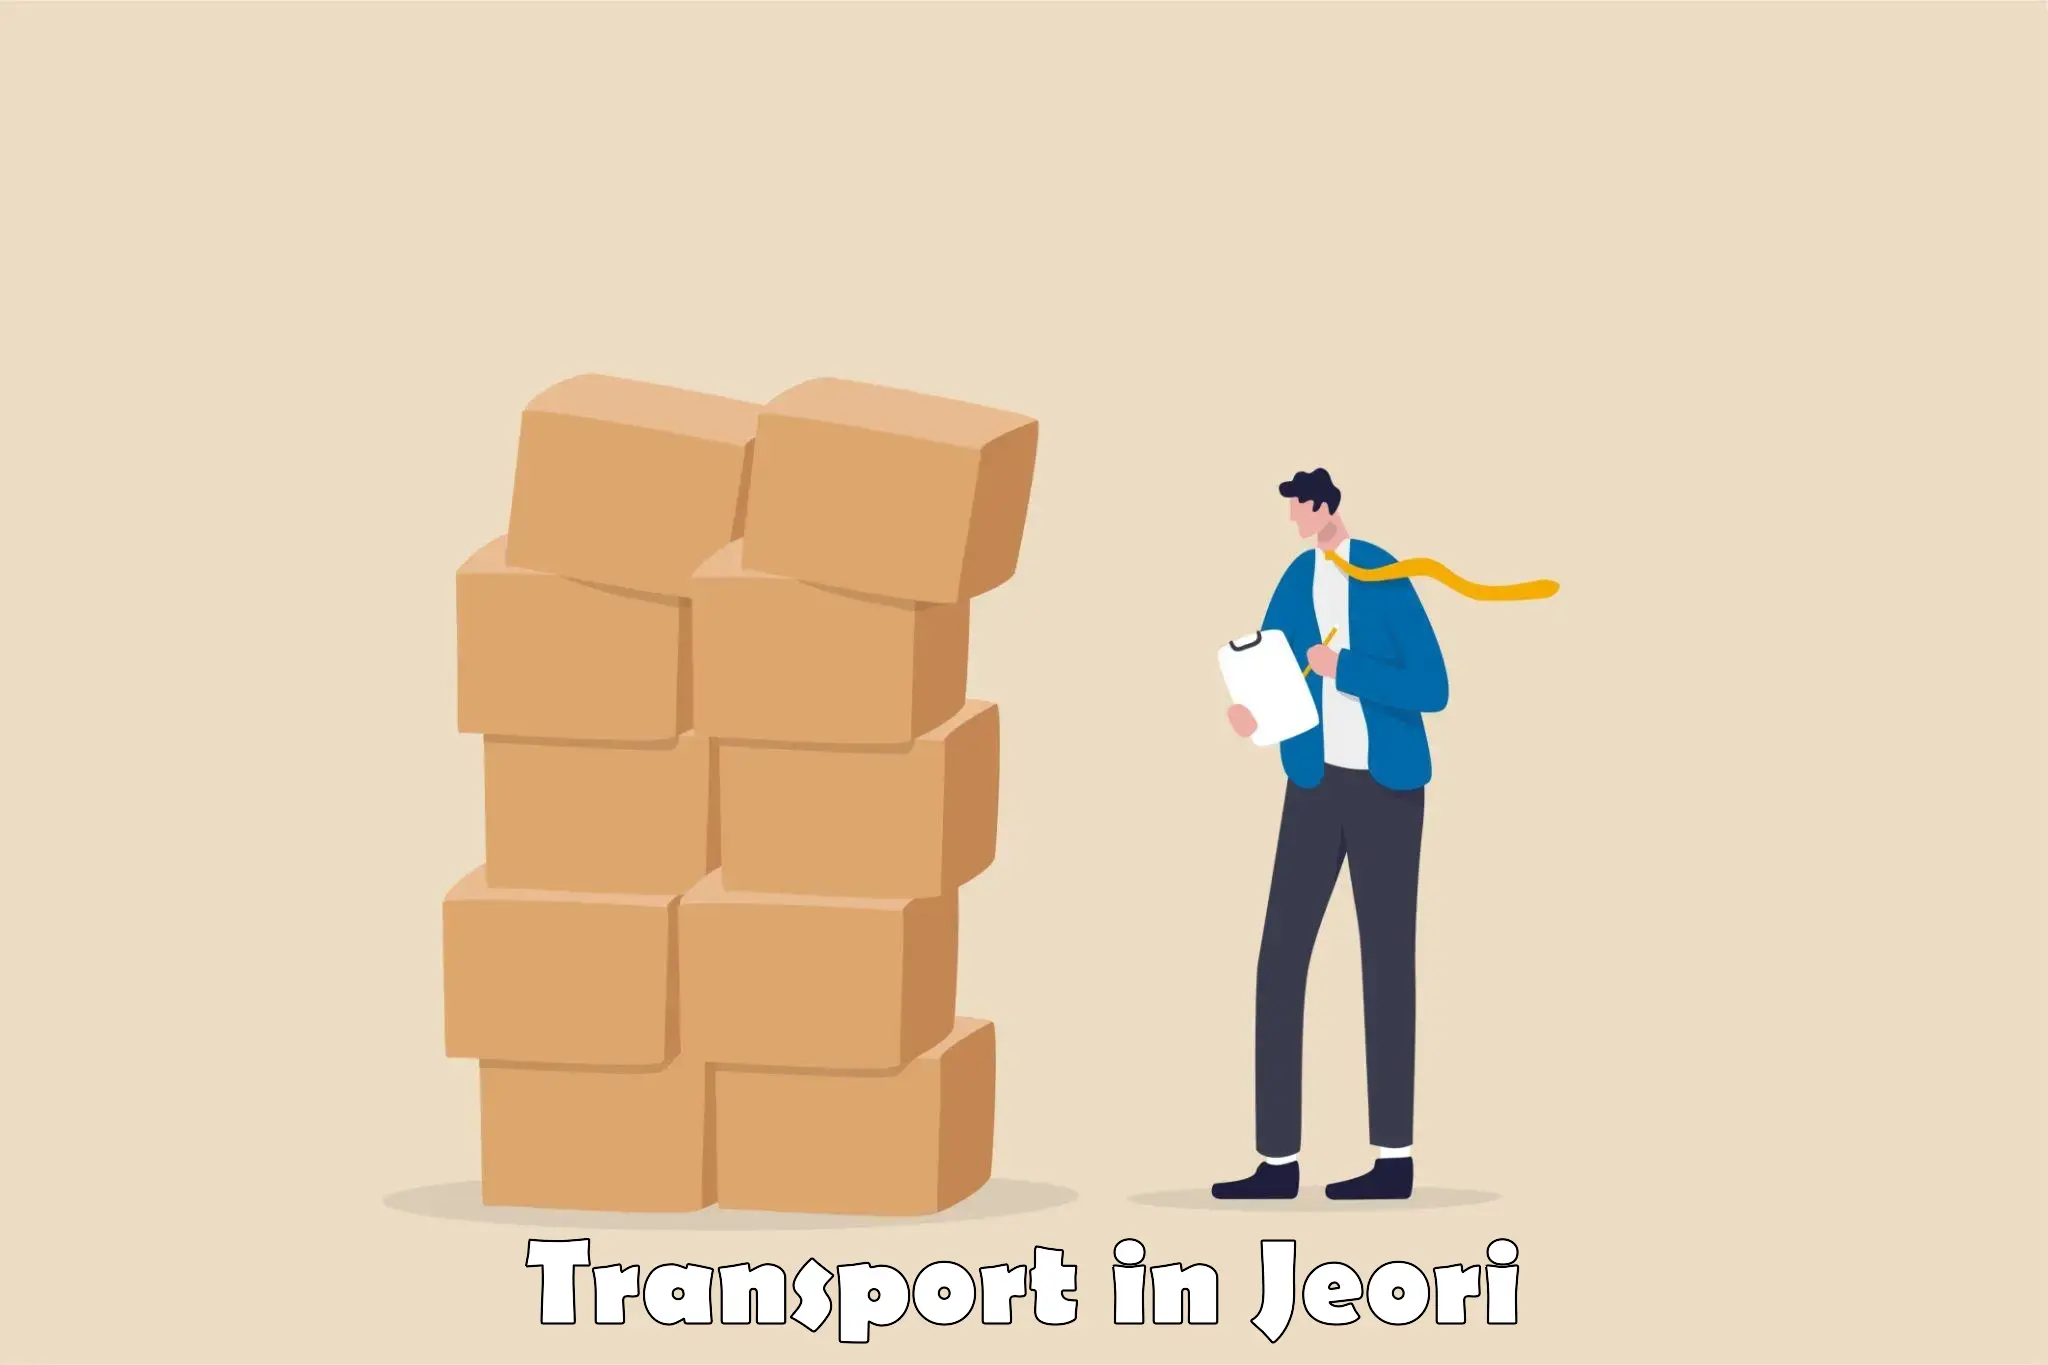 Two wheeler transport services in Jeori